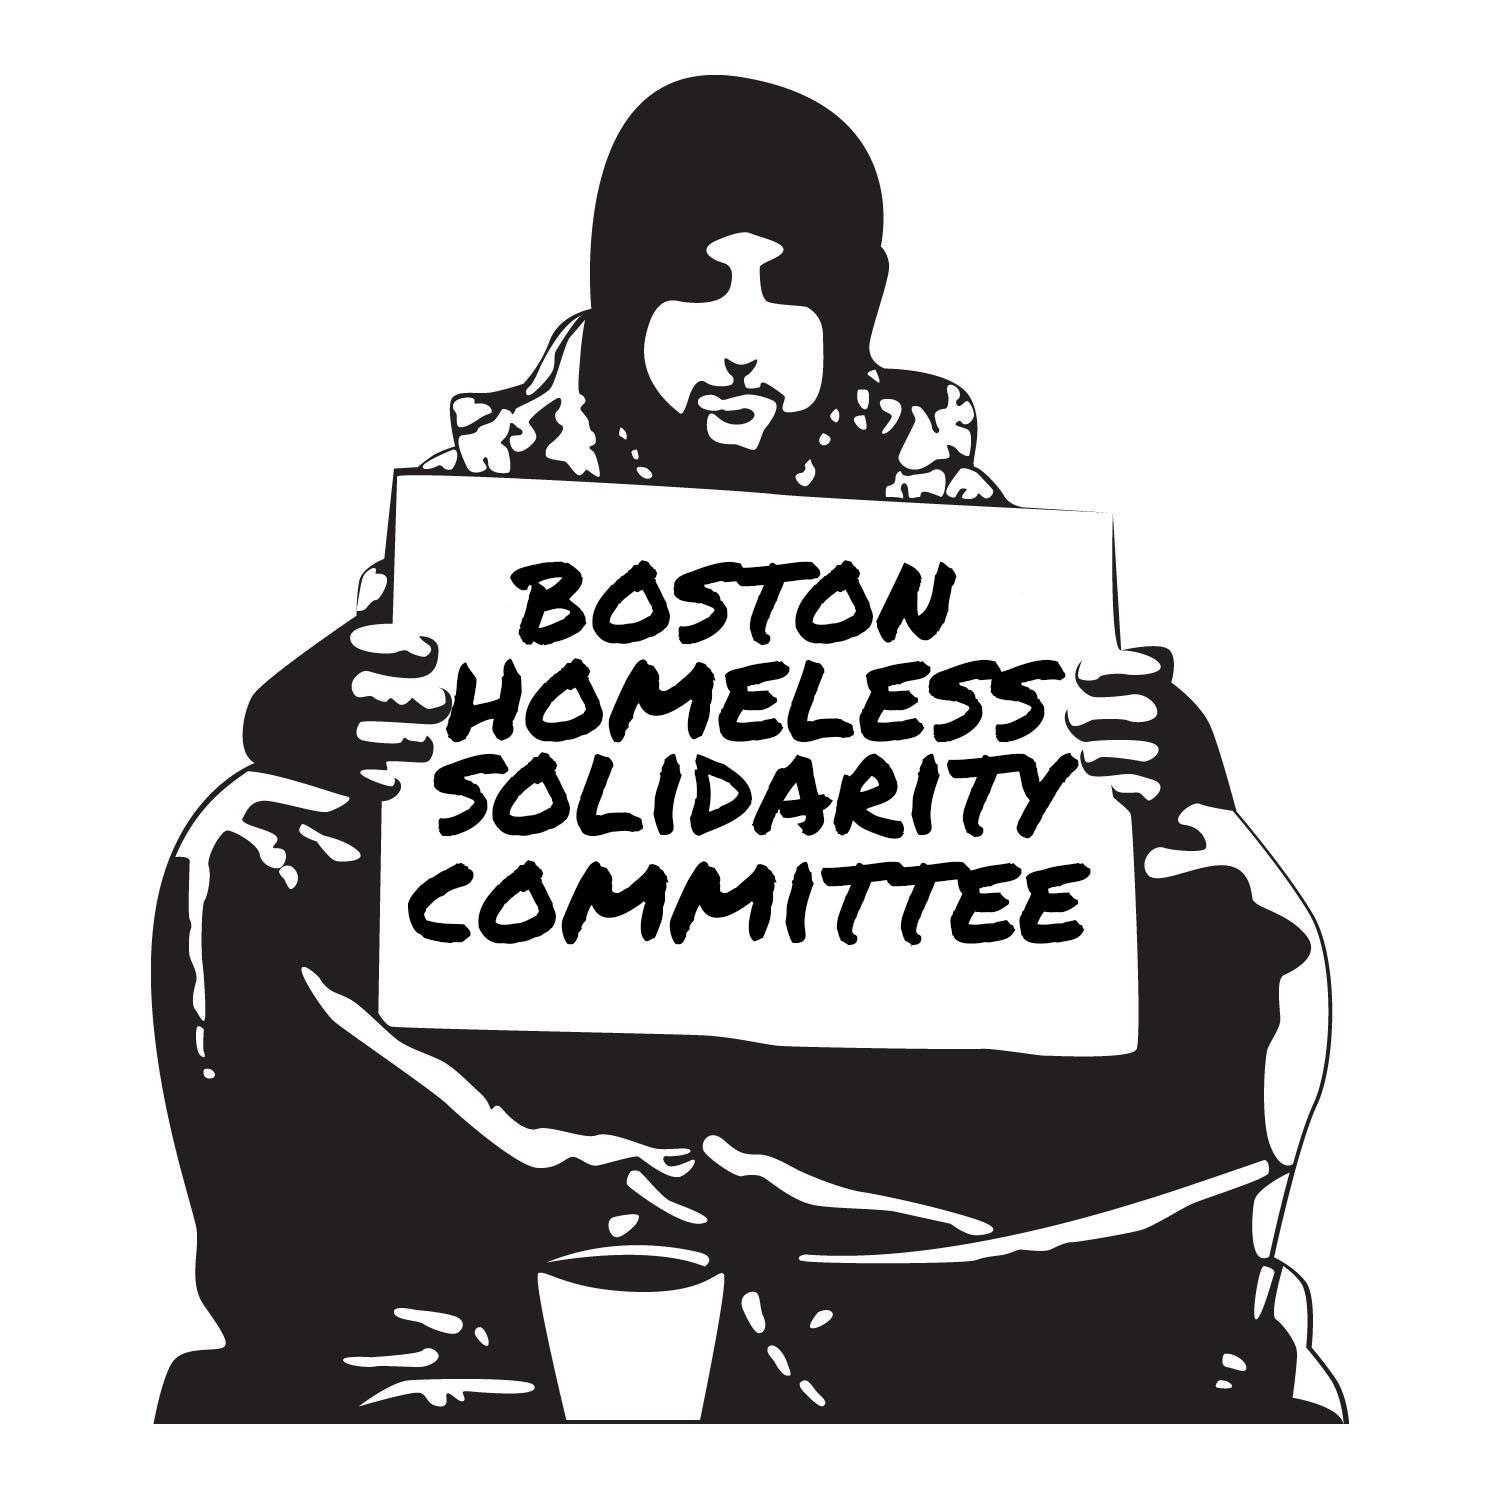 Homeless & formerly homeless people & supporters fighting for housing and humane & dignified services in Greater Boston. https://t.co/uN5bri5T6F